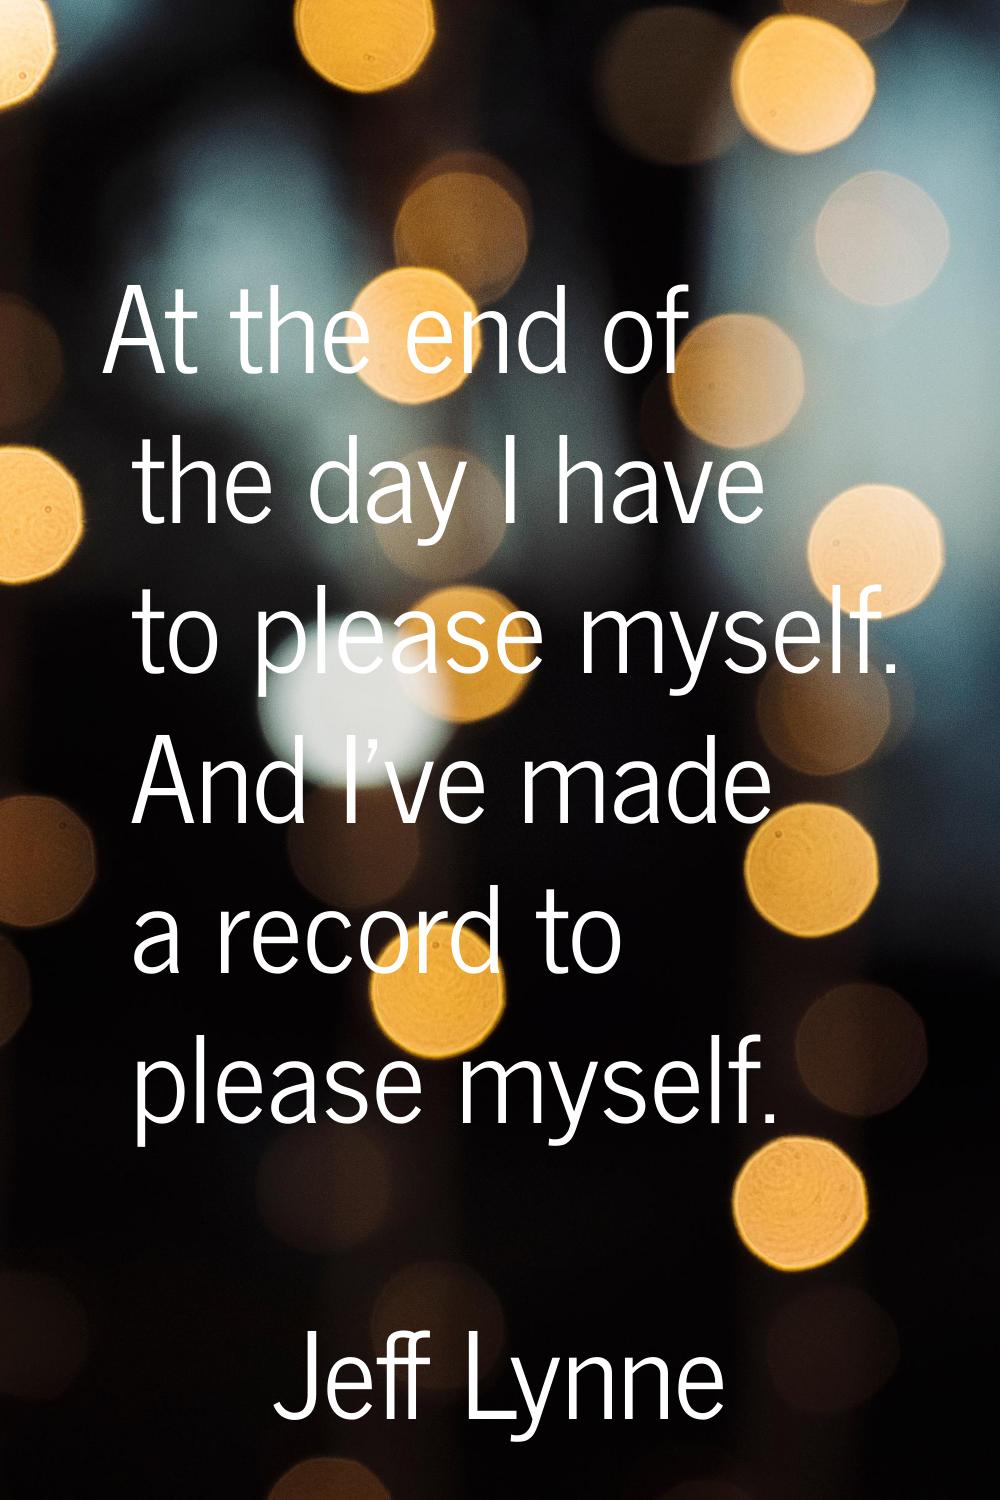 At the end of the day I have to please myself. And I've made a record to please myself.